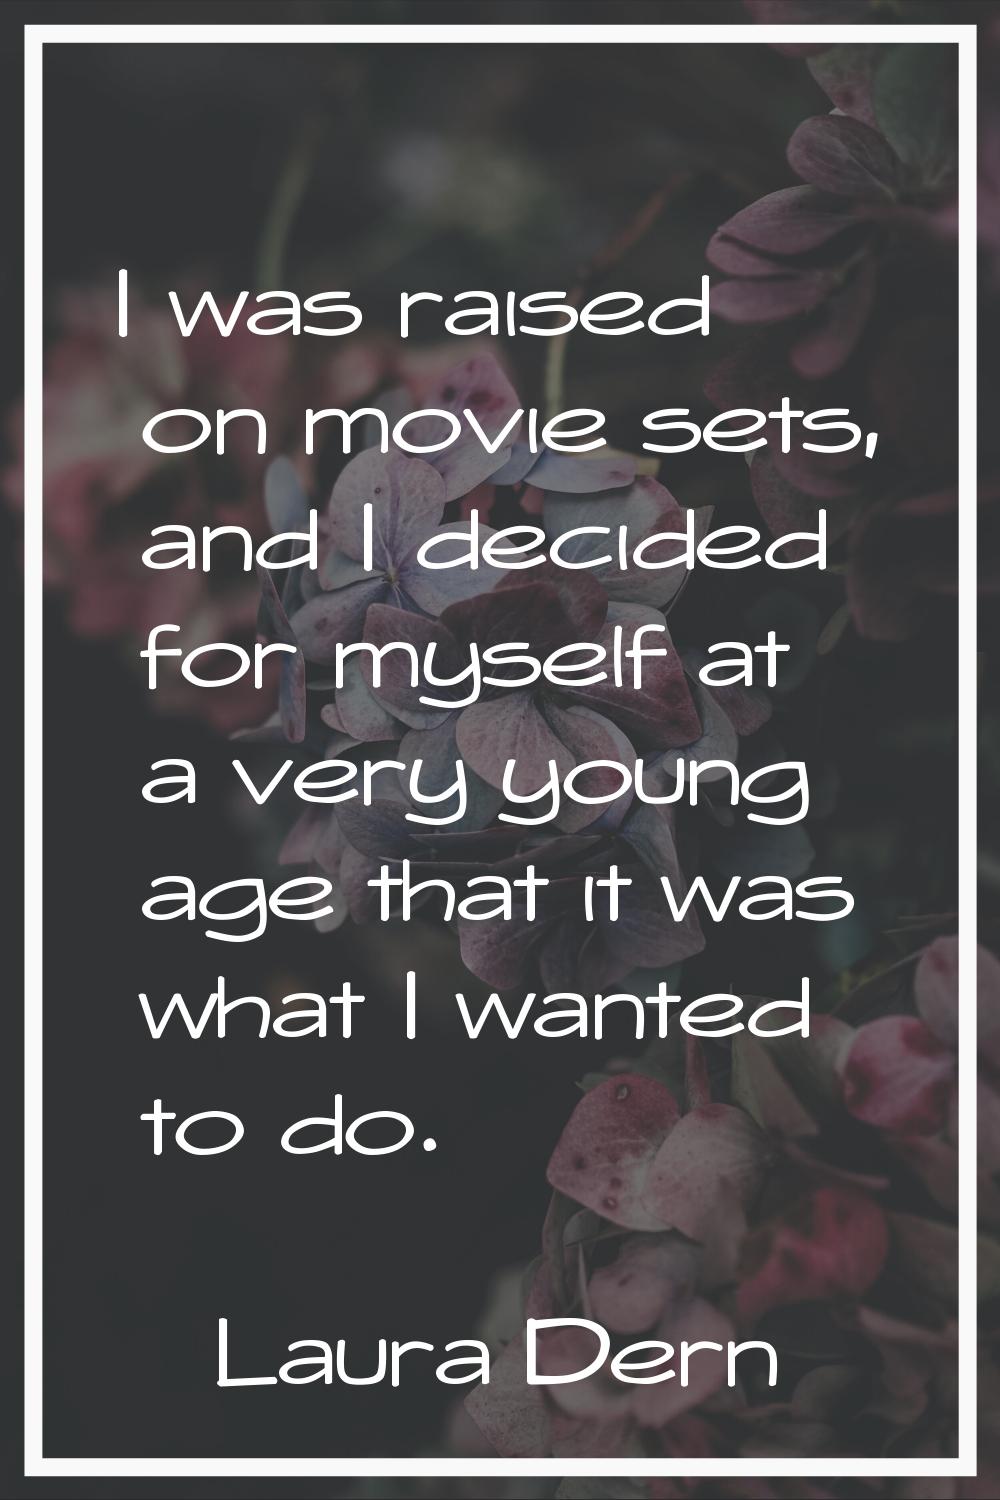 I was raised on movie sets, and I decided for myself at a very young age that it was what I wanted 